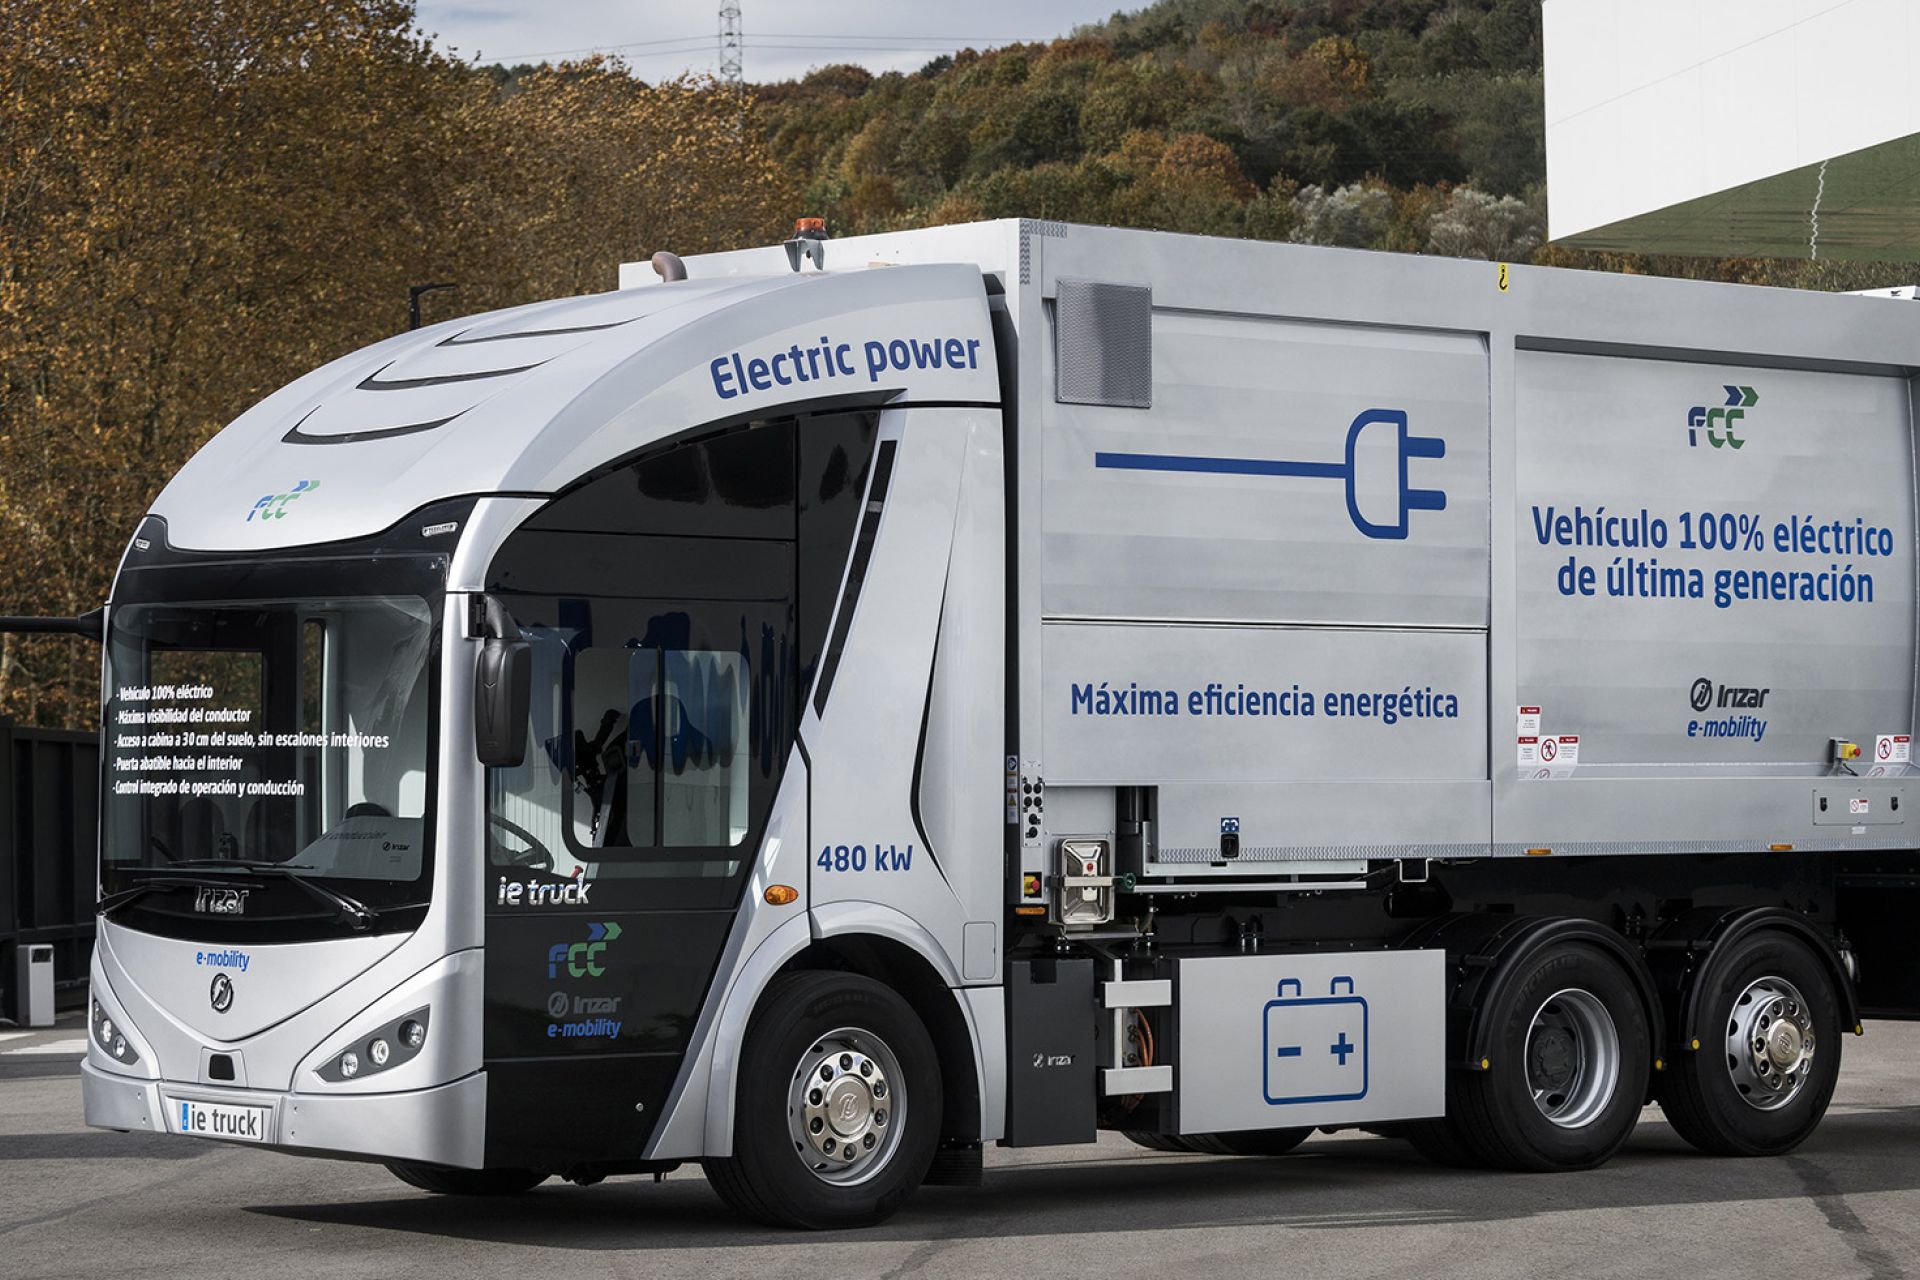 The Irizar ie truck, the zero-emission truck from the Irizar Group, has won the World Smart City award in the Innovative Idea category